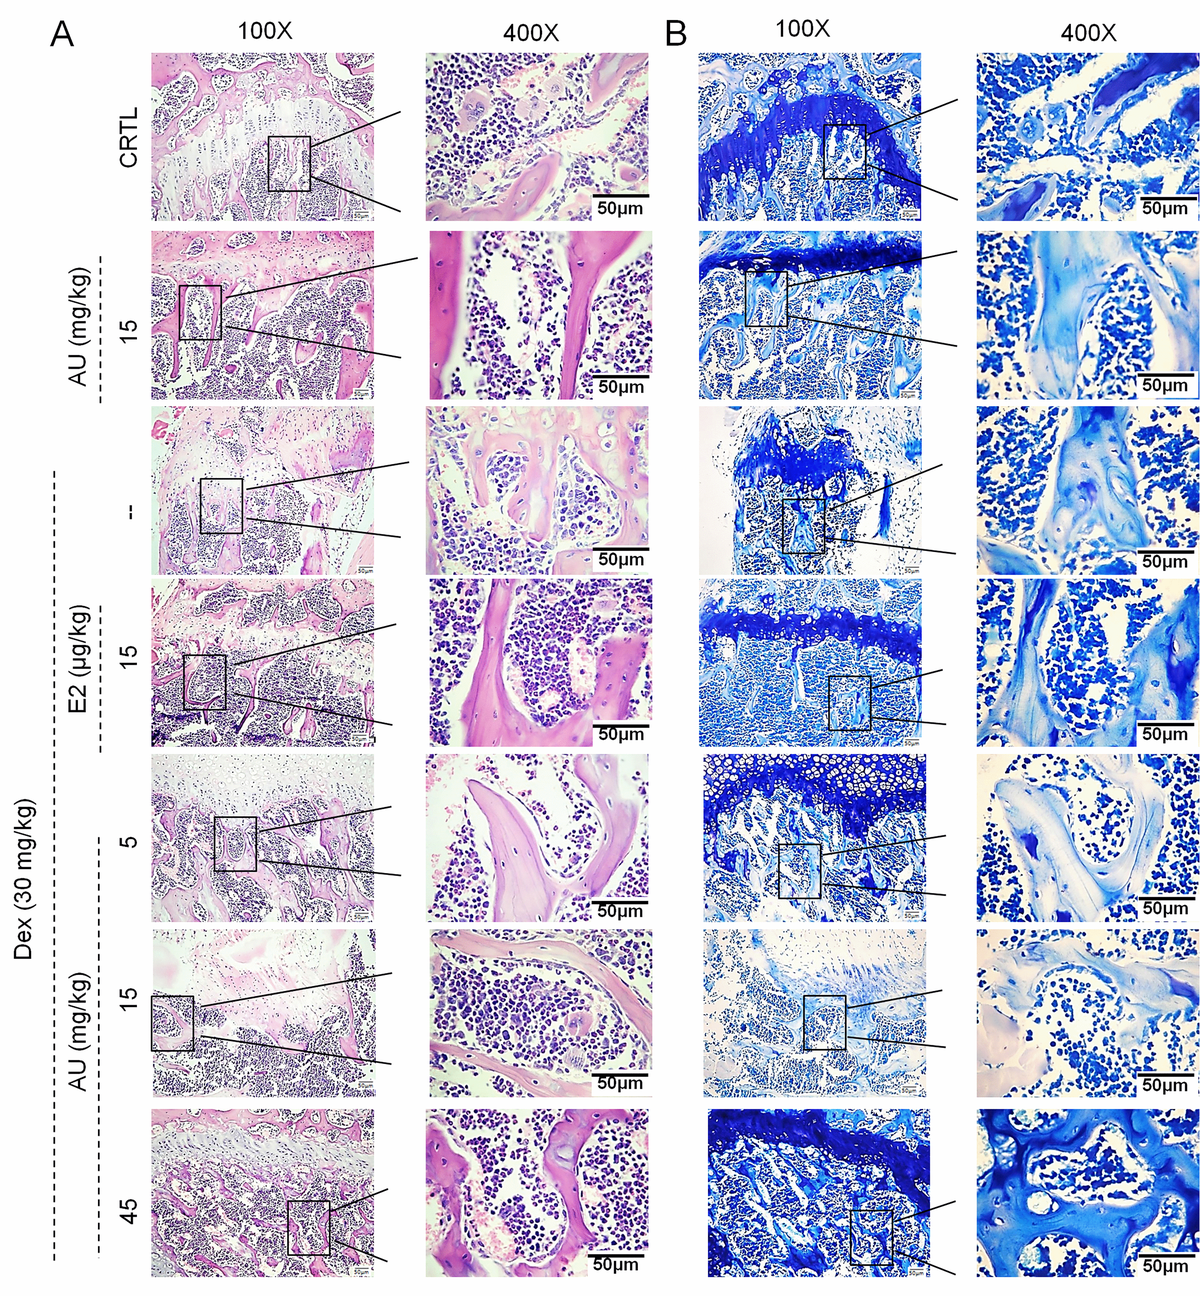 The effects of AU on the femoral histological changes of osteoporotic mice were detected by (A) H&E staining and (B) Giemsa staining (n=6).